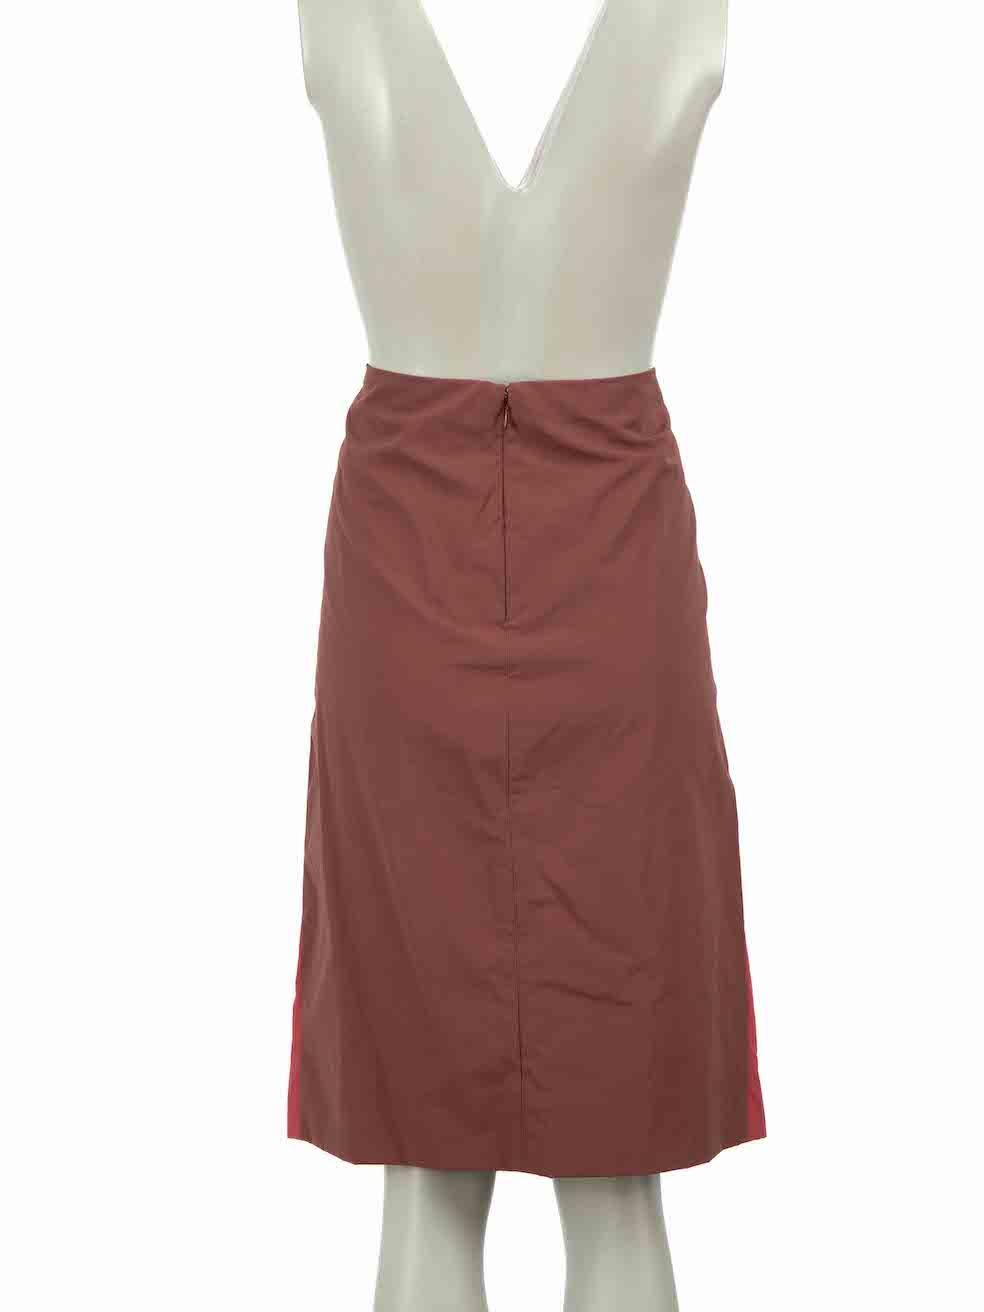 Marni Burgundy Knee Length Pencil Skirt Size S In Excellent Condition For Sale In London, GB